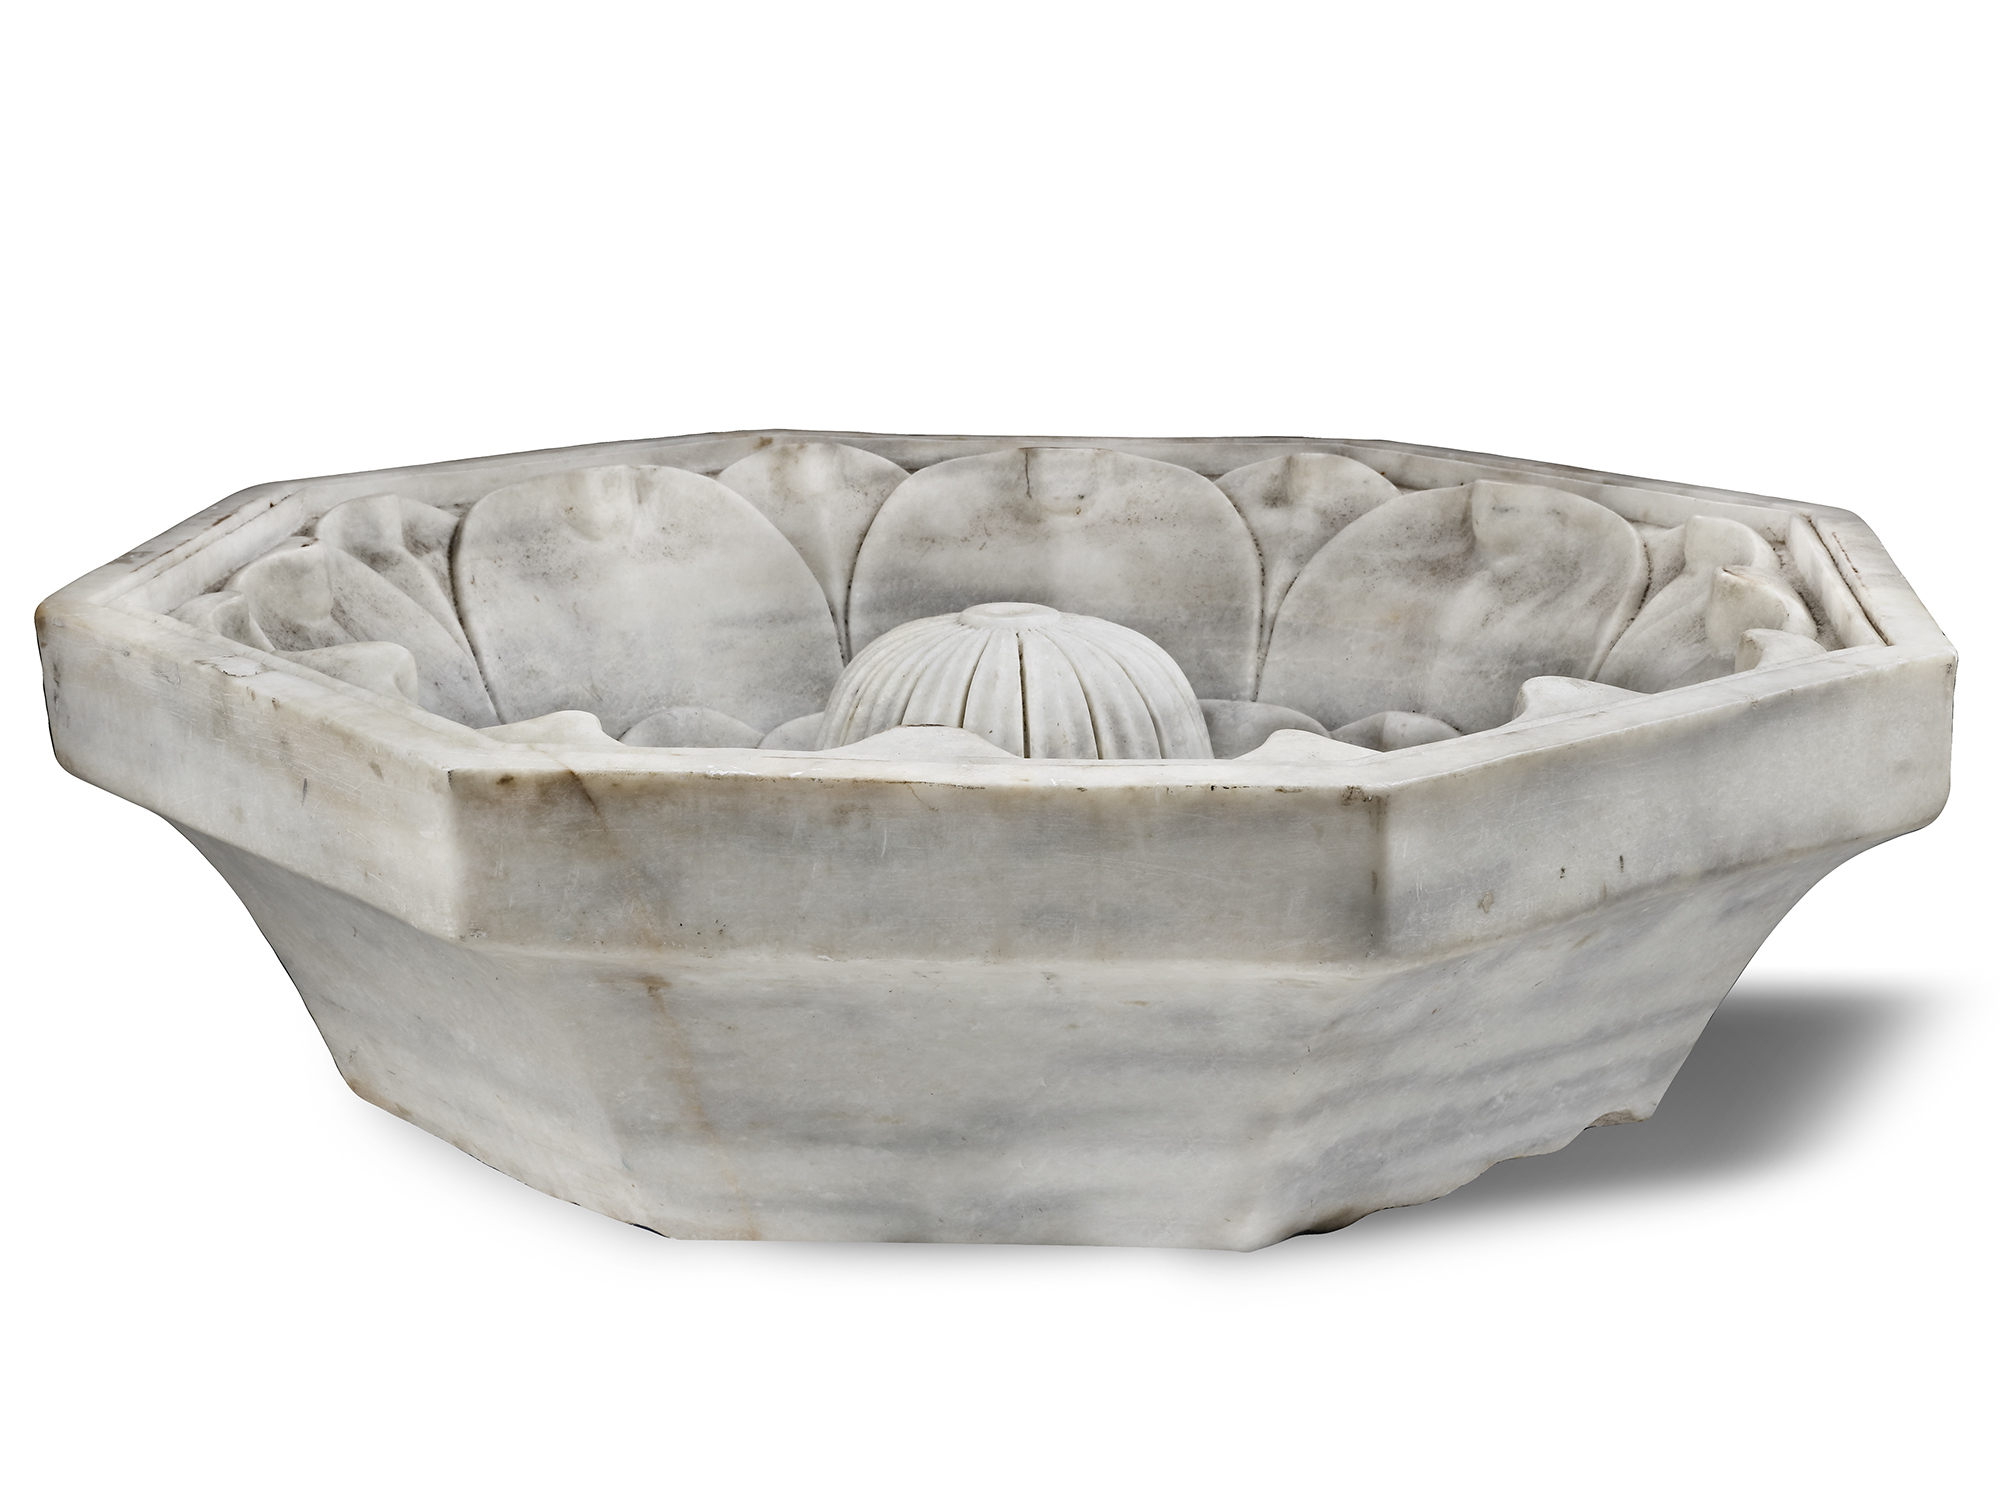 AN INDIAN CARVED WHITE MARBLE FOUNTAIN BASIN, NORTH INDIA, 19TH CENTURY - Image 2 of 3